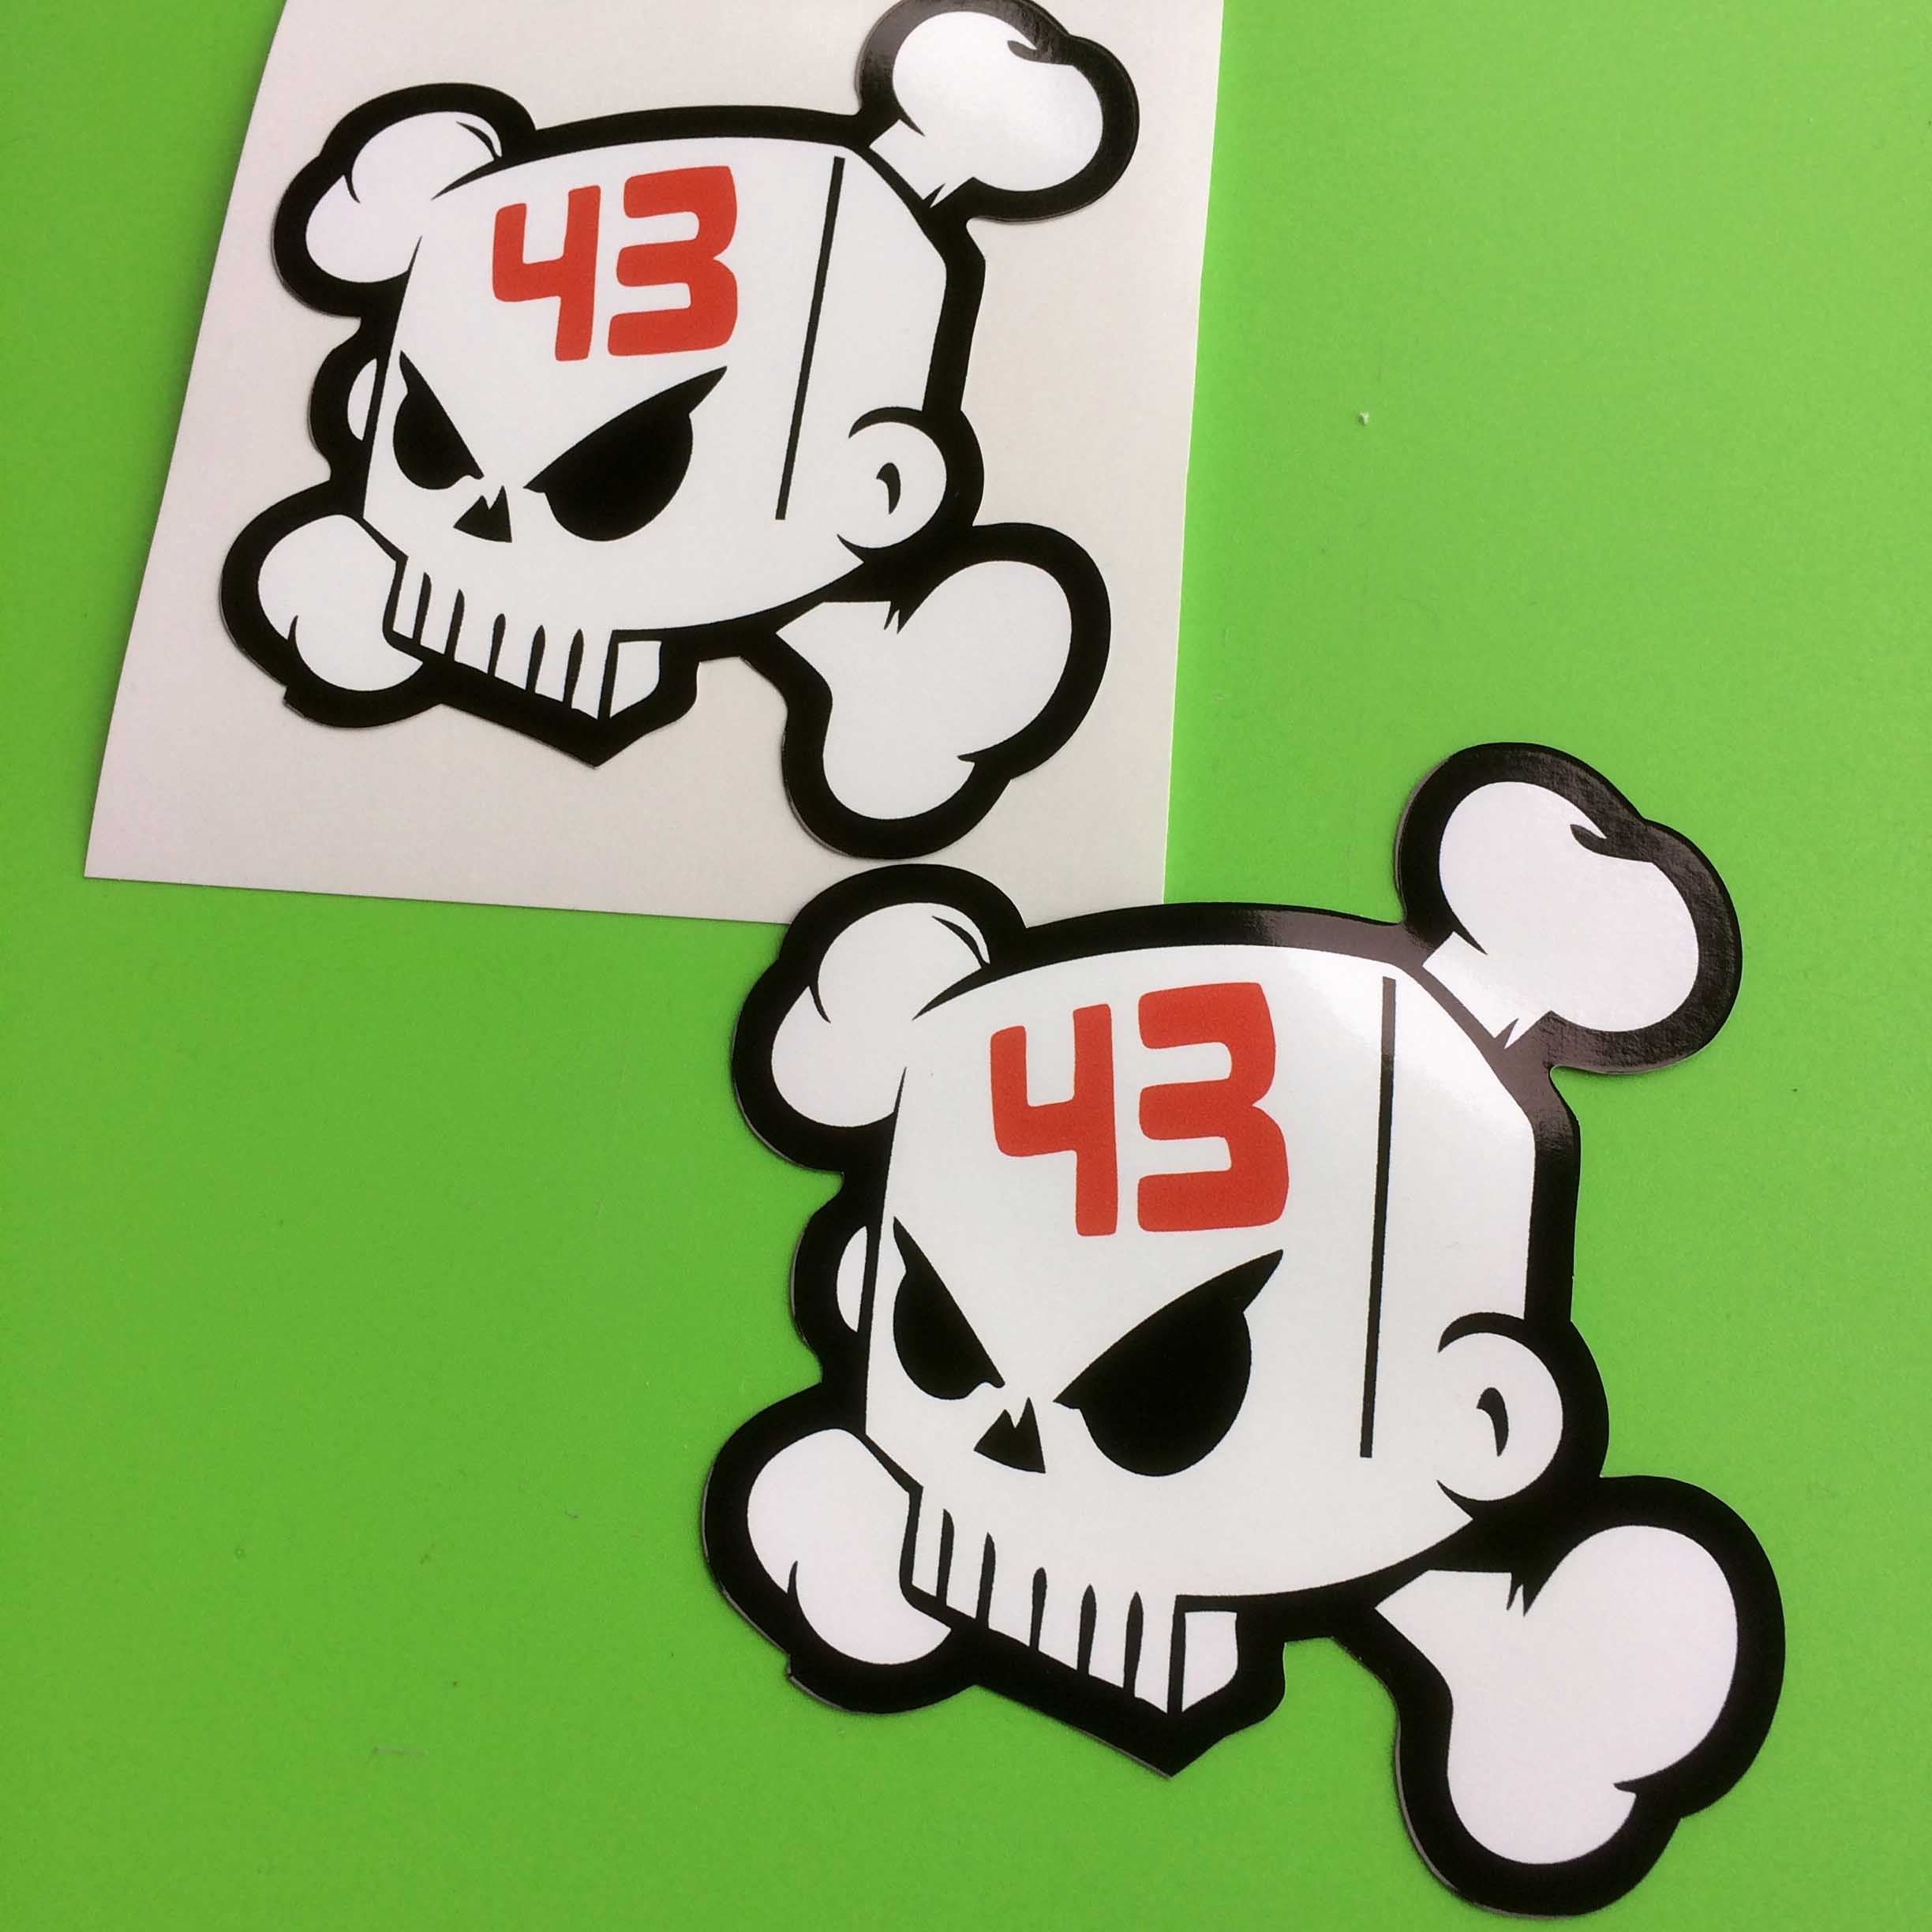 A white skull and crossbones edged in black with the number 43 in red on the forehead.